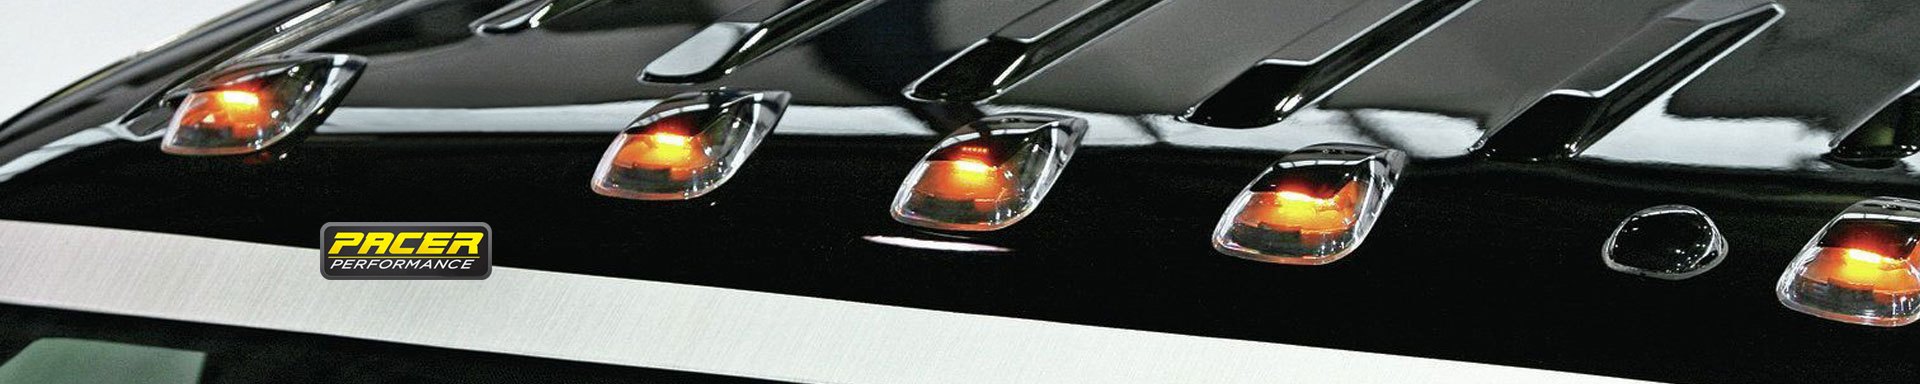 Pacer Performance Signal Lights